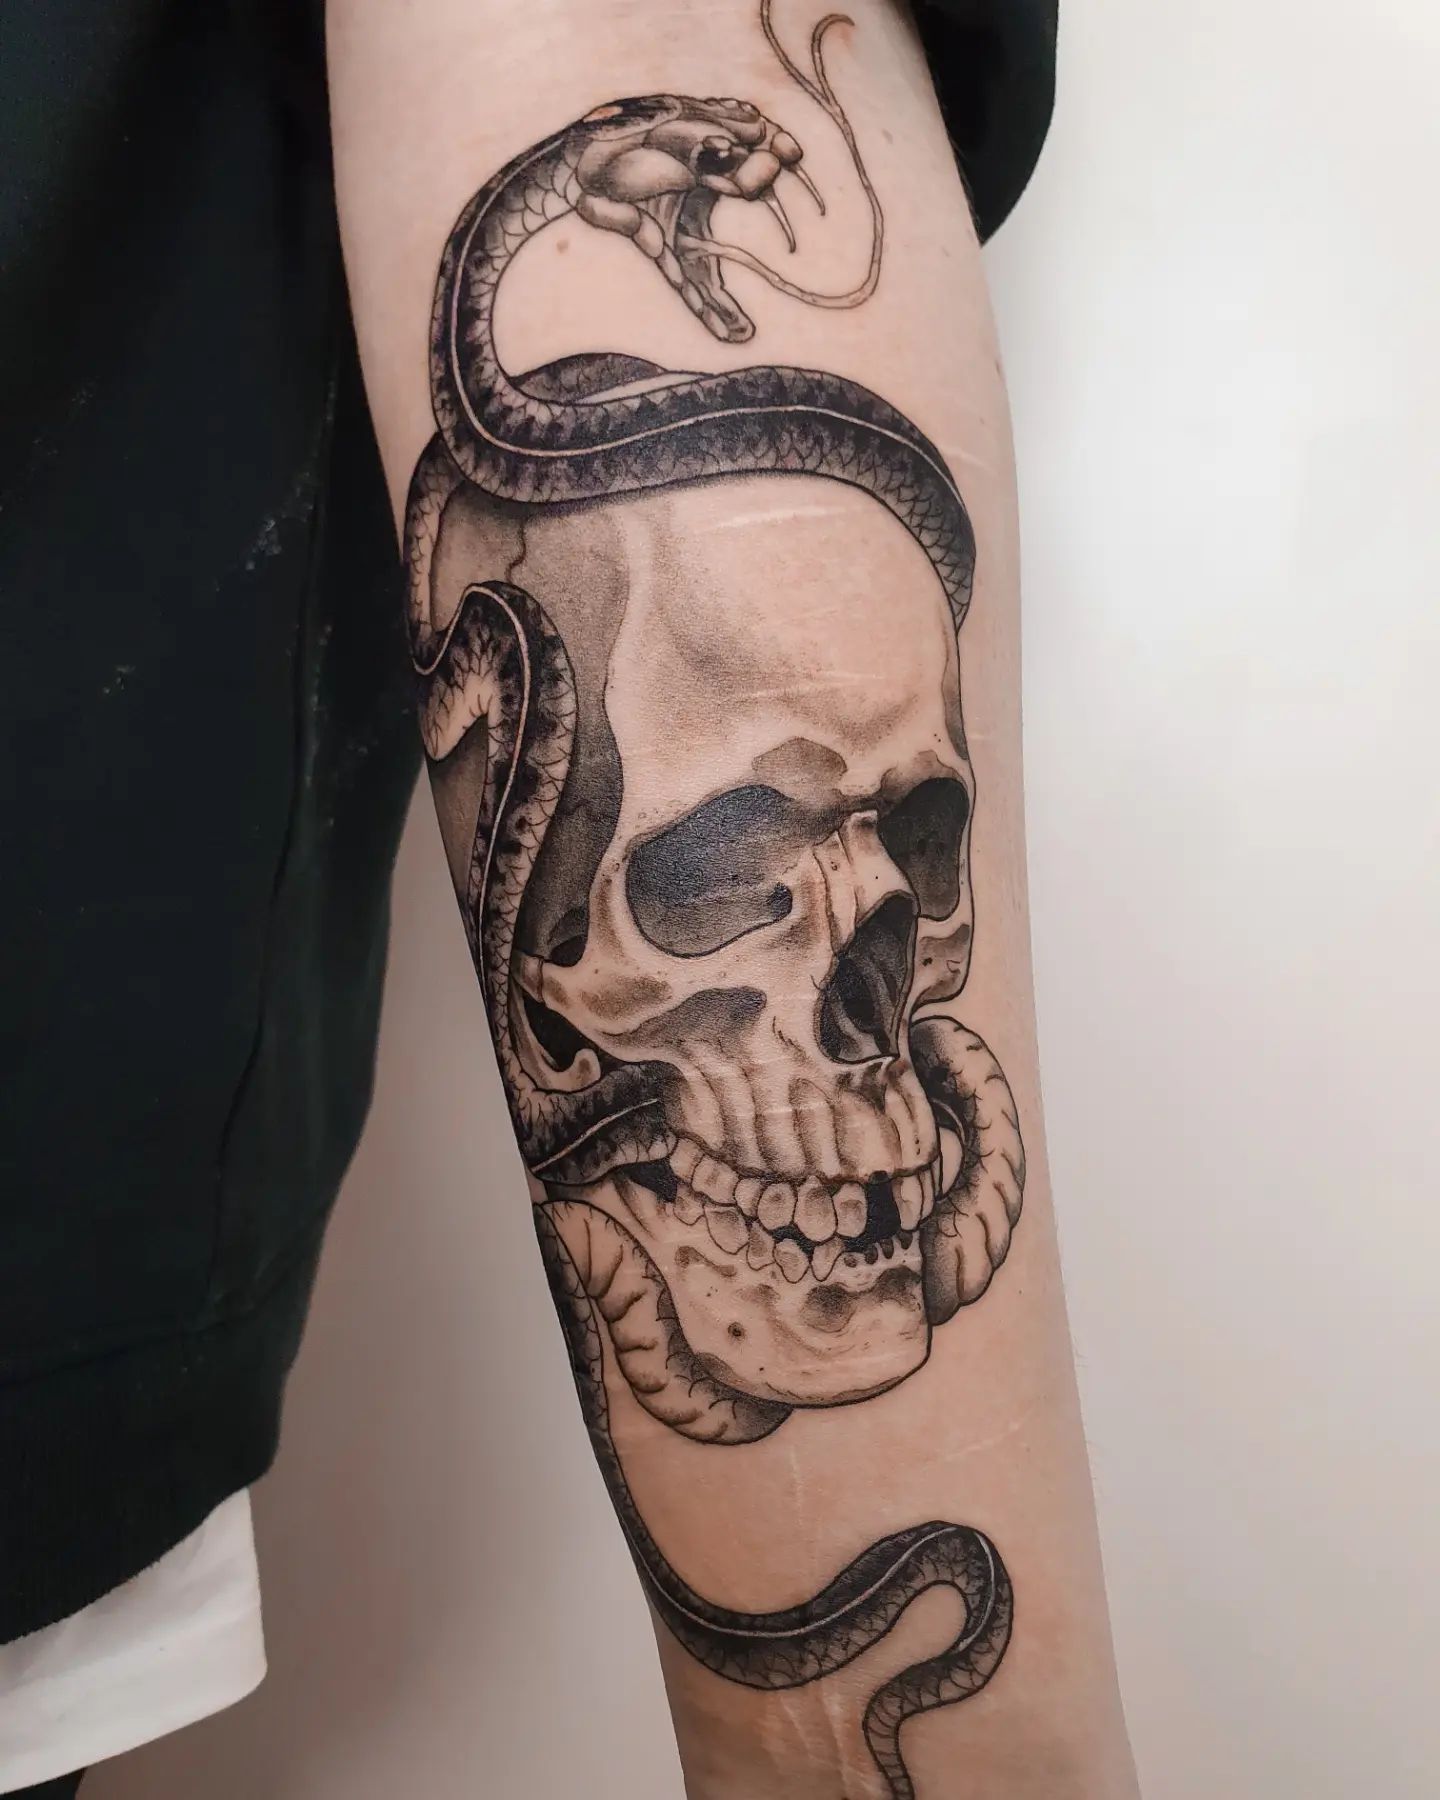 Some good old skullnsnake thing for @alinabxes . Thanks for the trust 
.
#tattoo